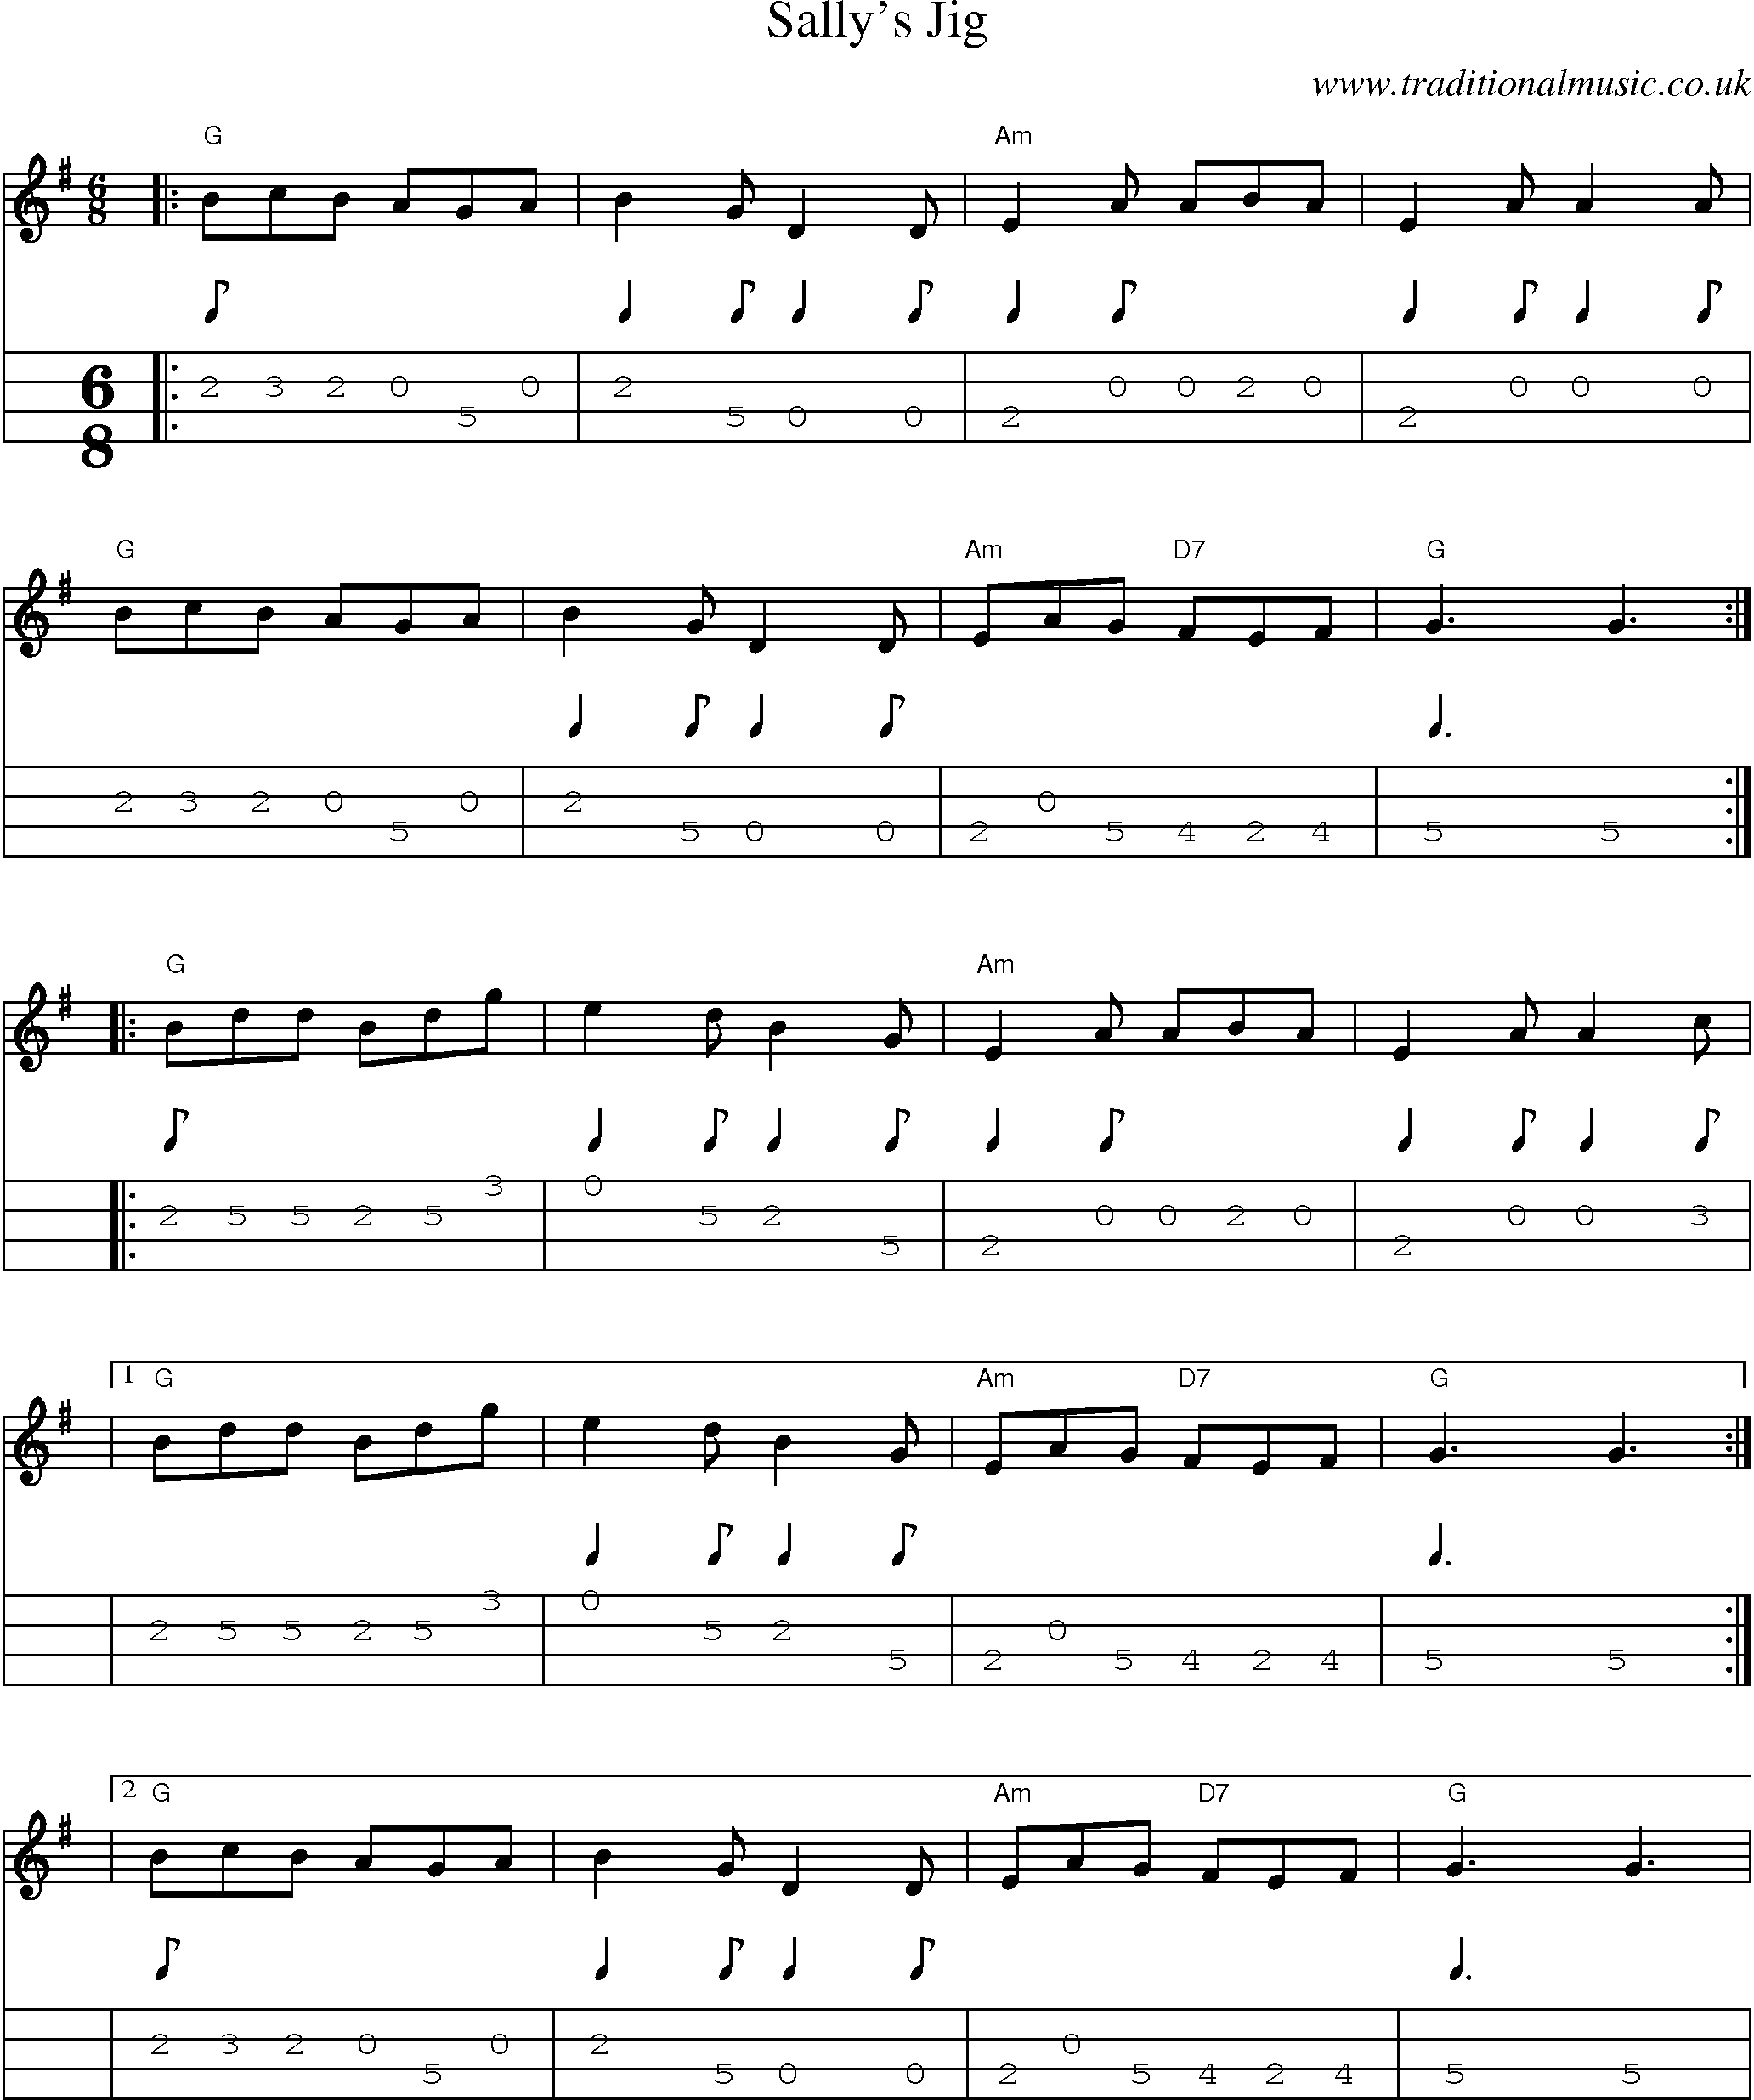 Music Score and Mandolin Tabs for Sallys Jig